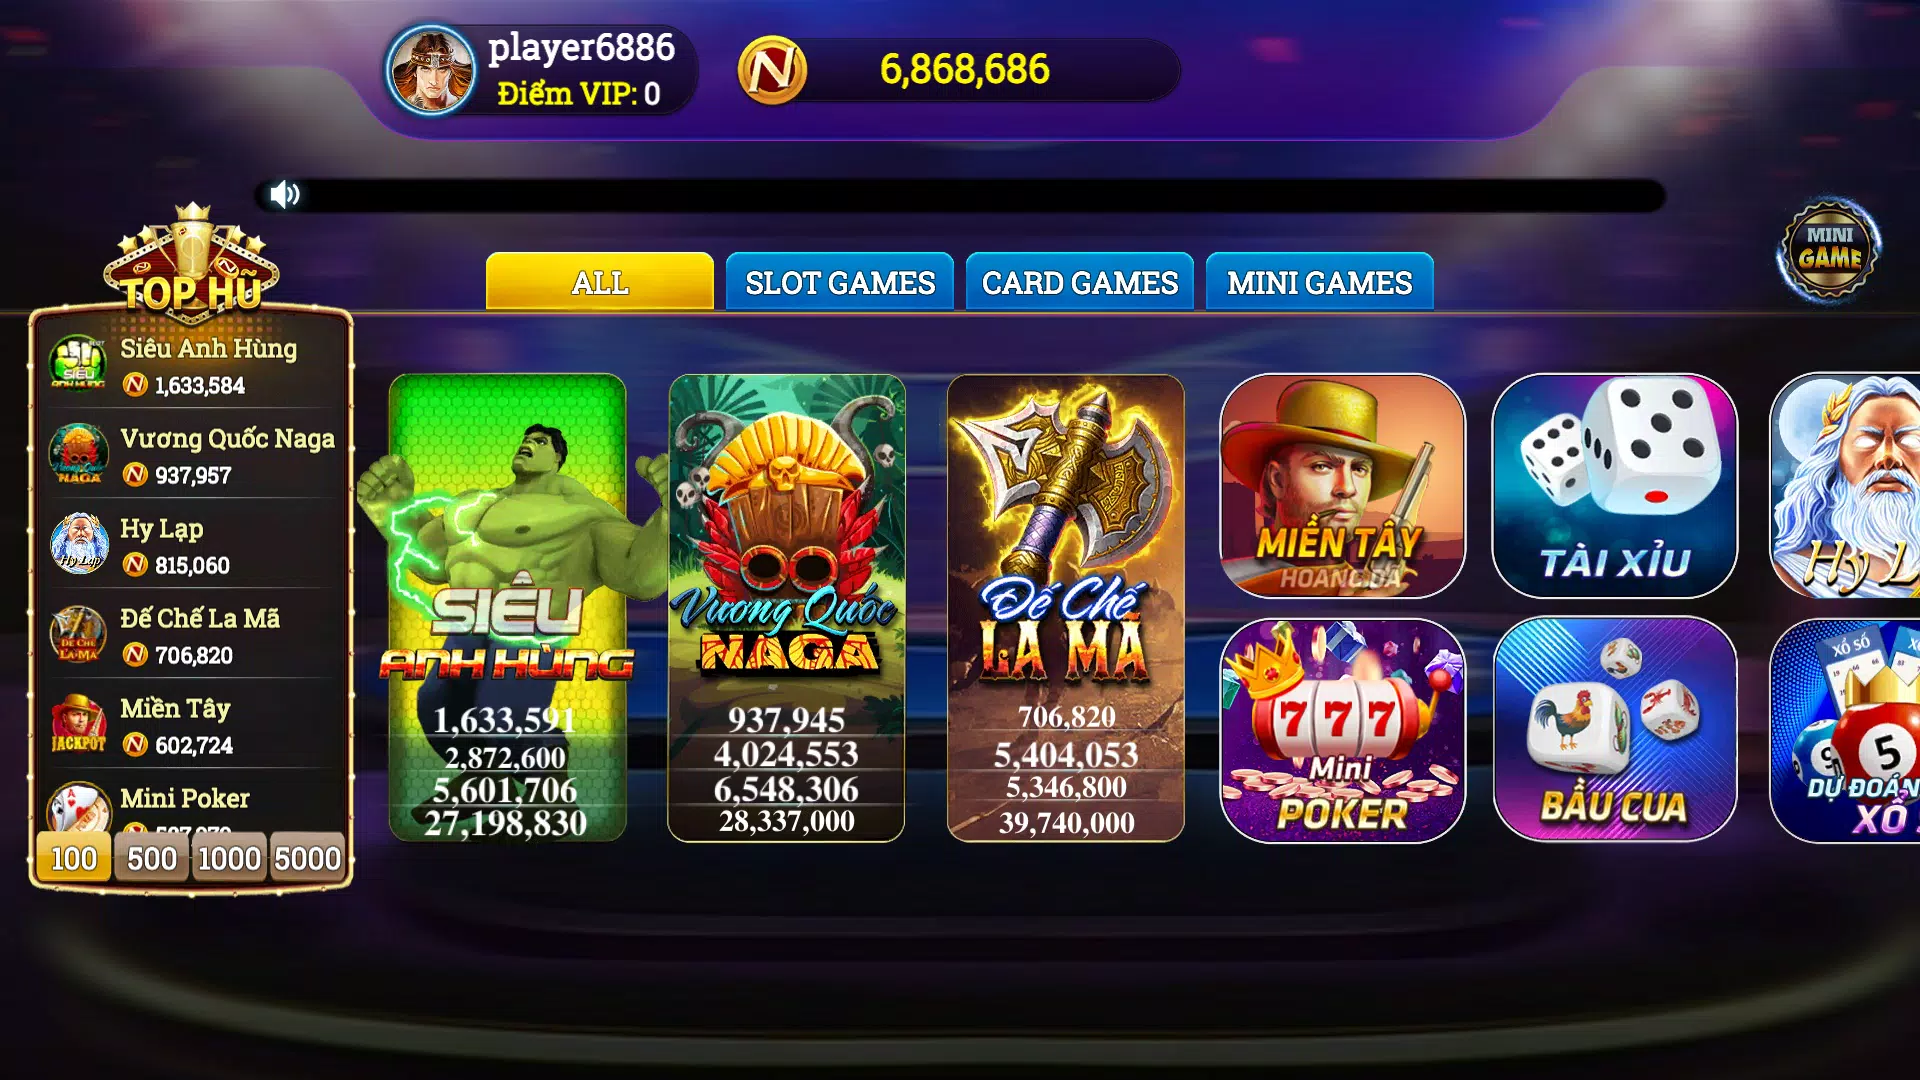 Nagavip for Android - APK Download